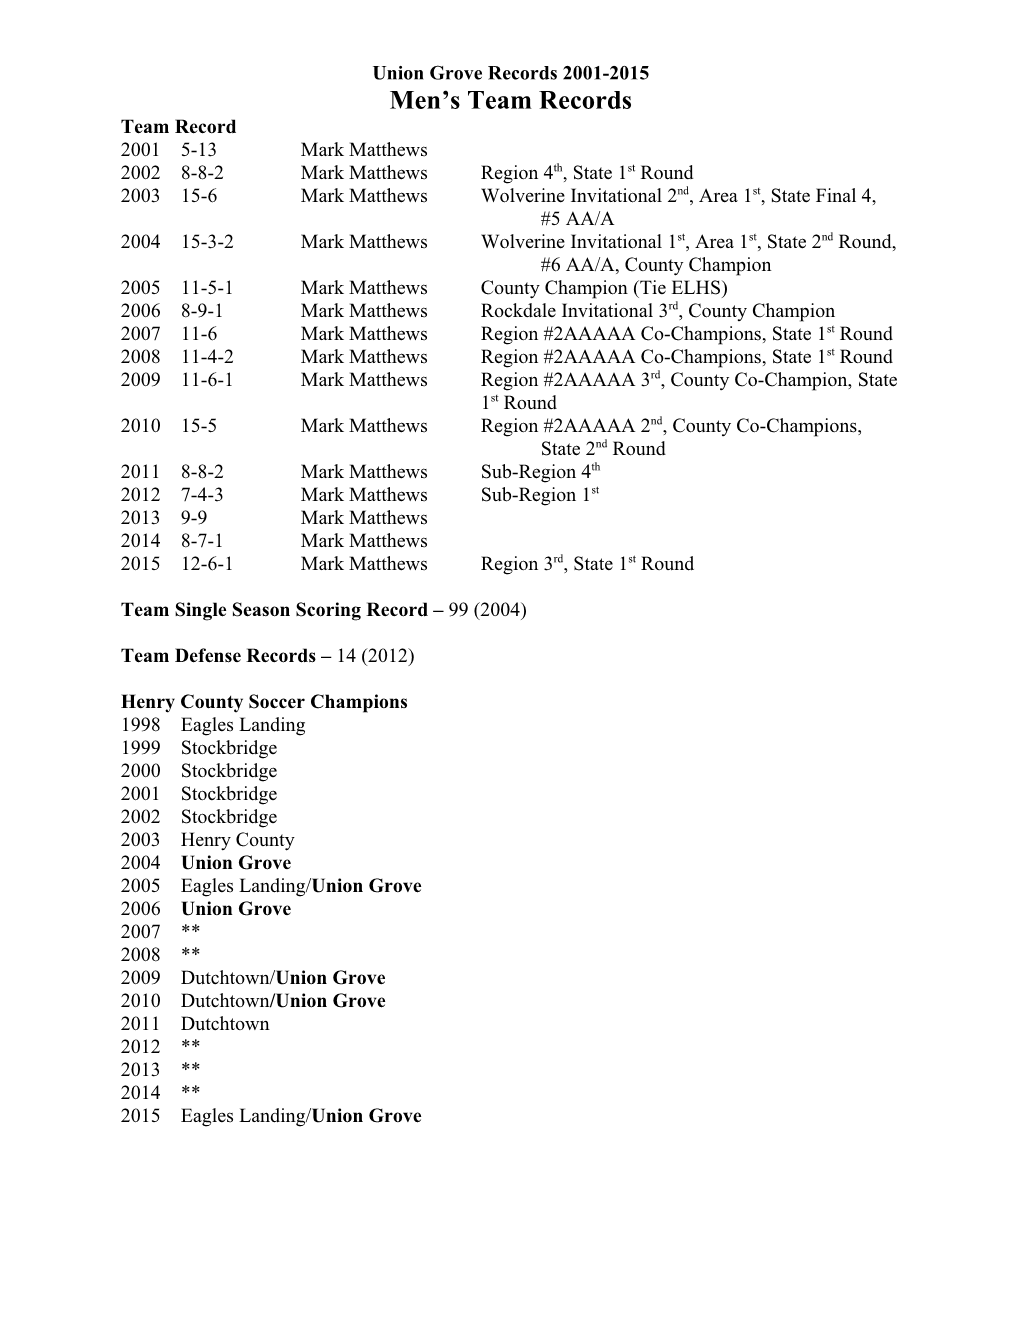 Henry County Records 1998-2001 s1